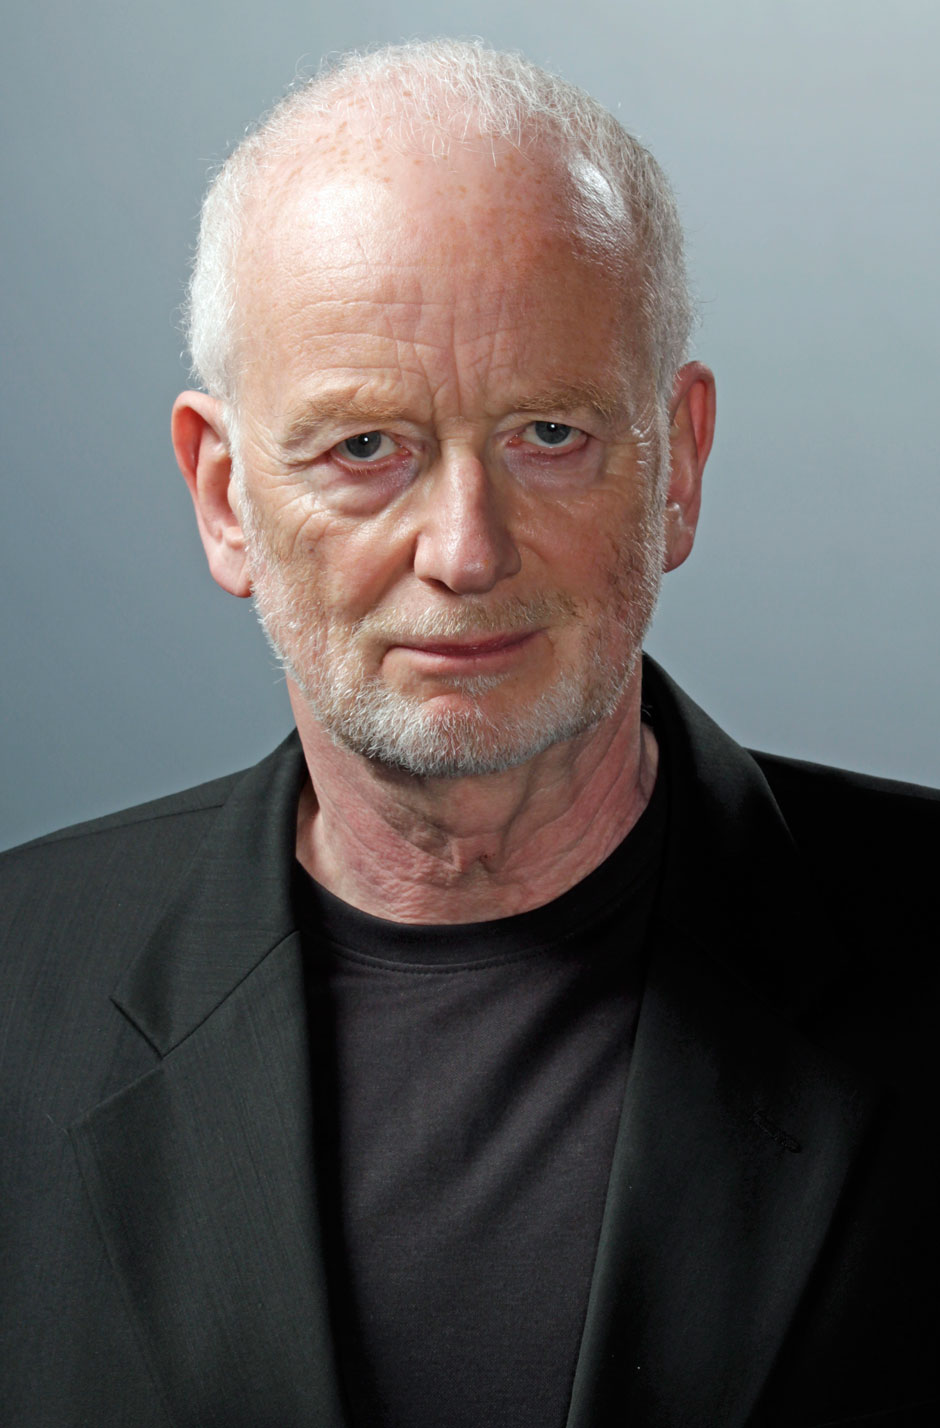 Who is the actor that portrayed Darth Sidious in the Star Wars prequel trilogy?